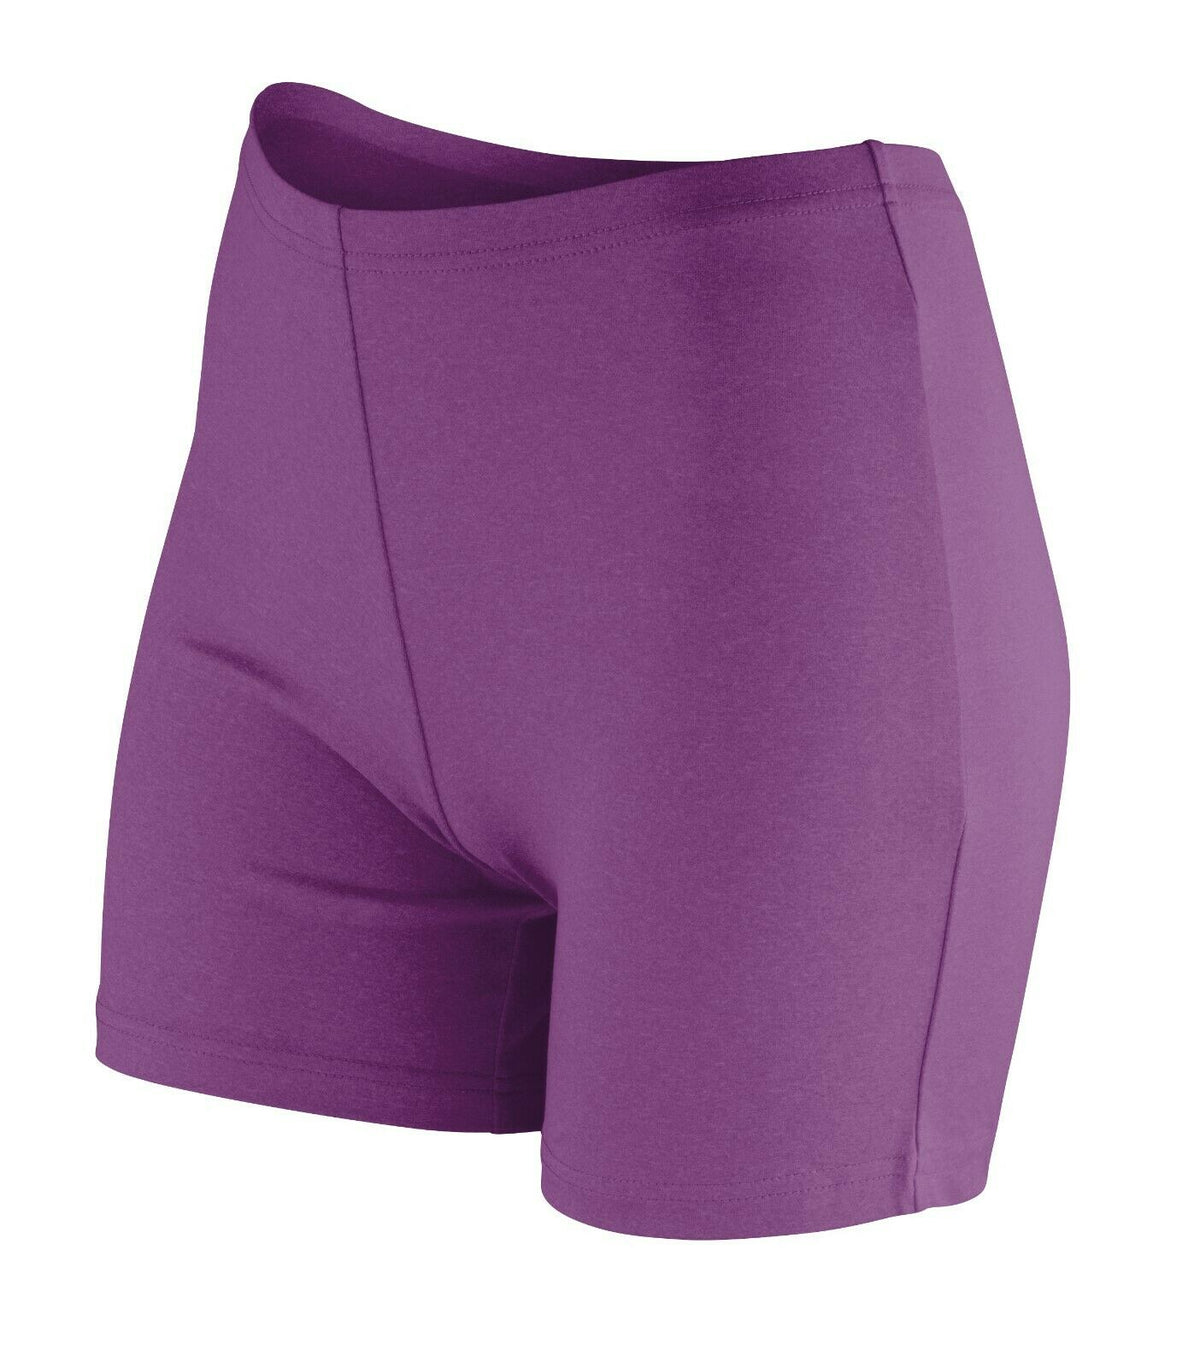 LADIES CYCLING FITNESS SOFTEX IMPACT SHORTS CASUAL WEAR & GYM RUNNING LEGGINGS - Hamtons Direct